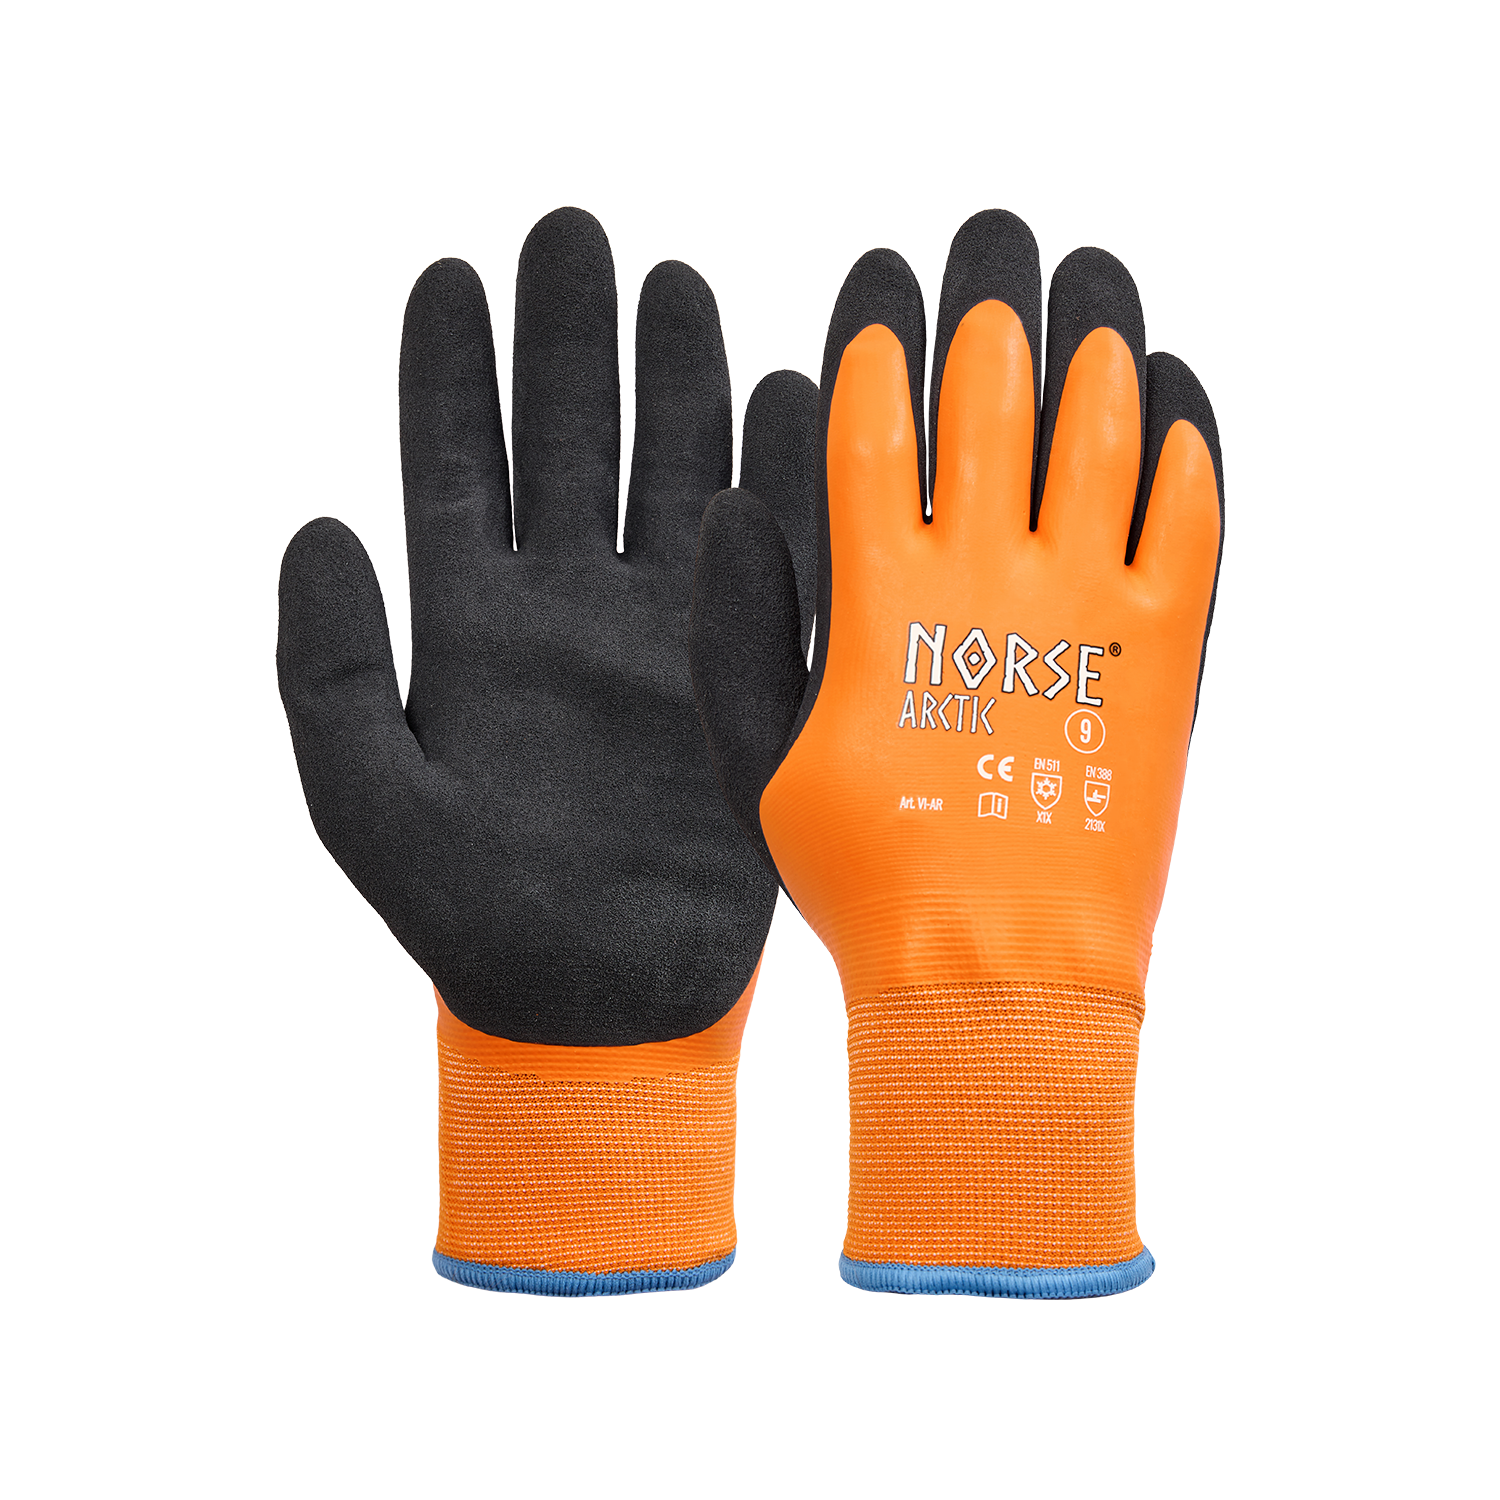 NORSE Arctic waterproof winter assembly gloves size 9